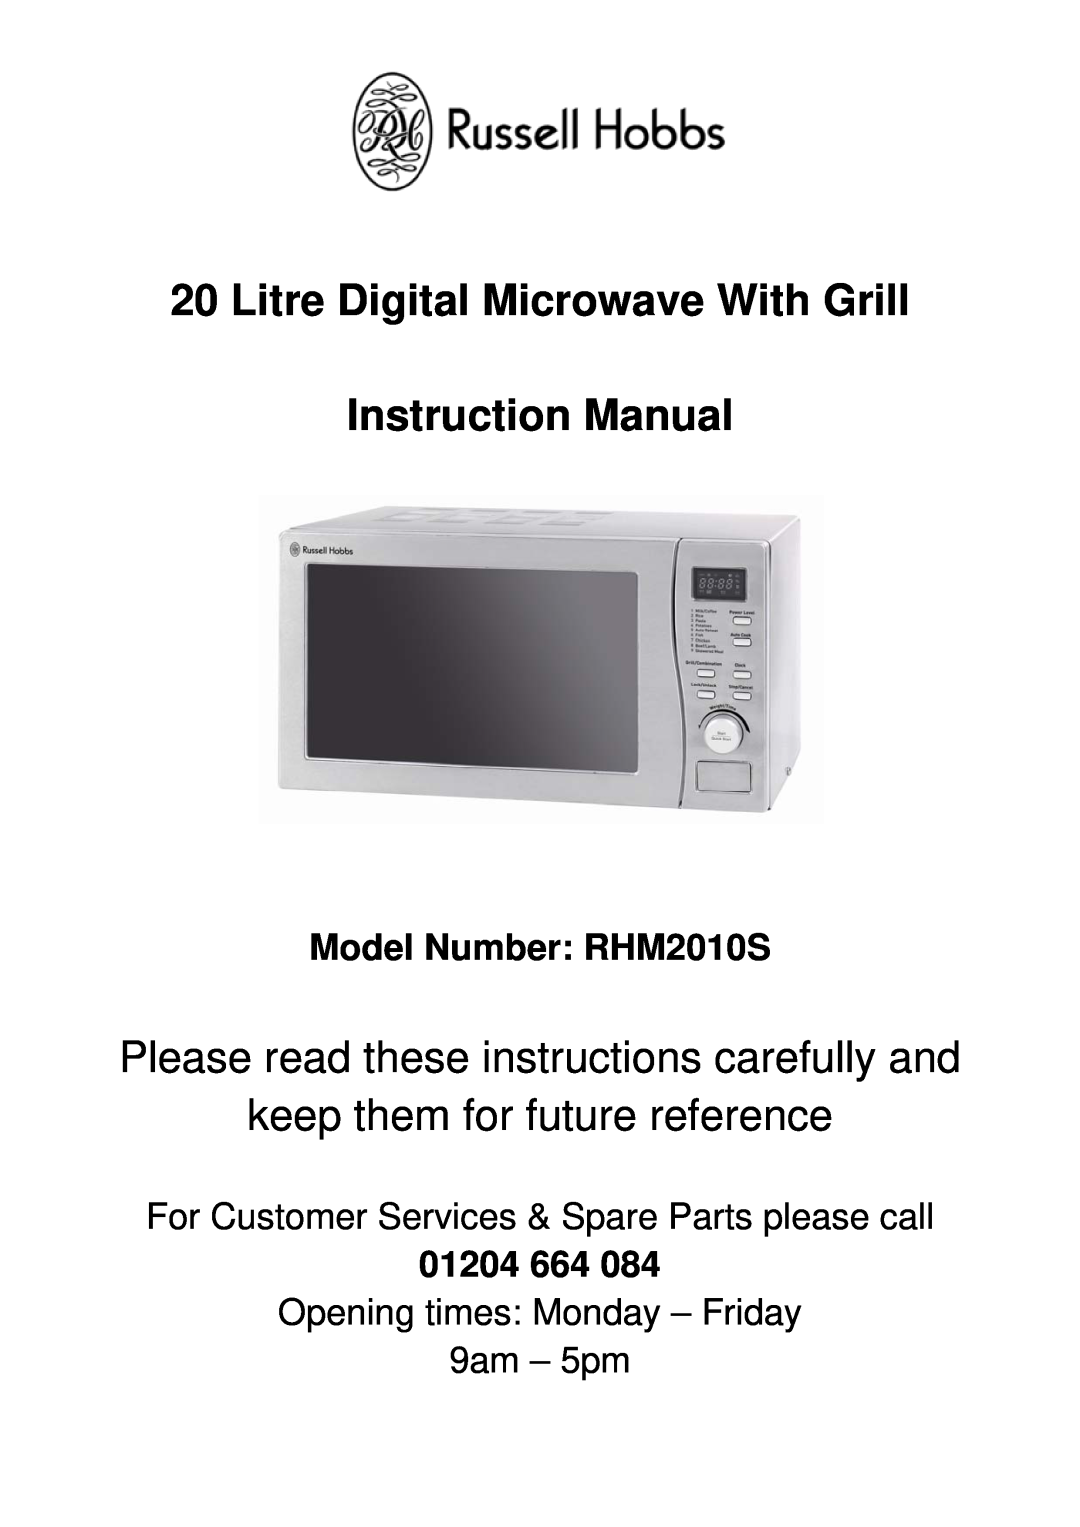 Russell Hobbs user manual Litre stainless steel microwave with grill Users manual, Model number RHM2010S 